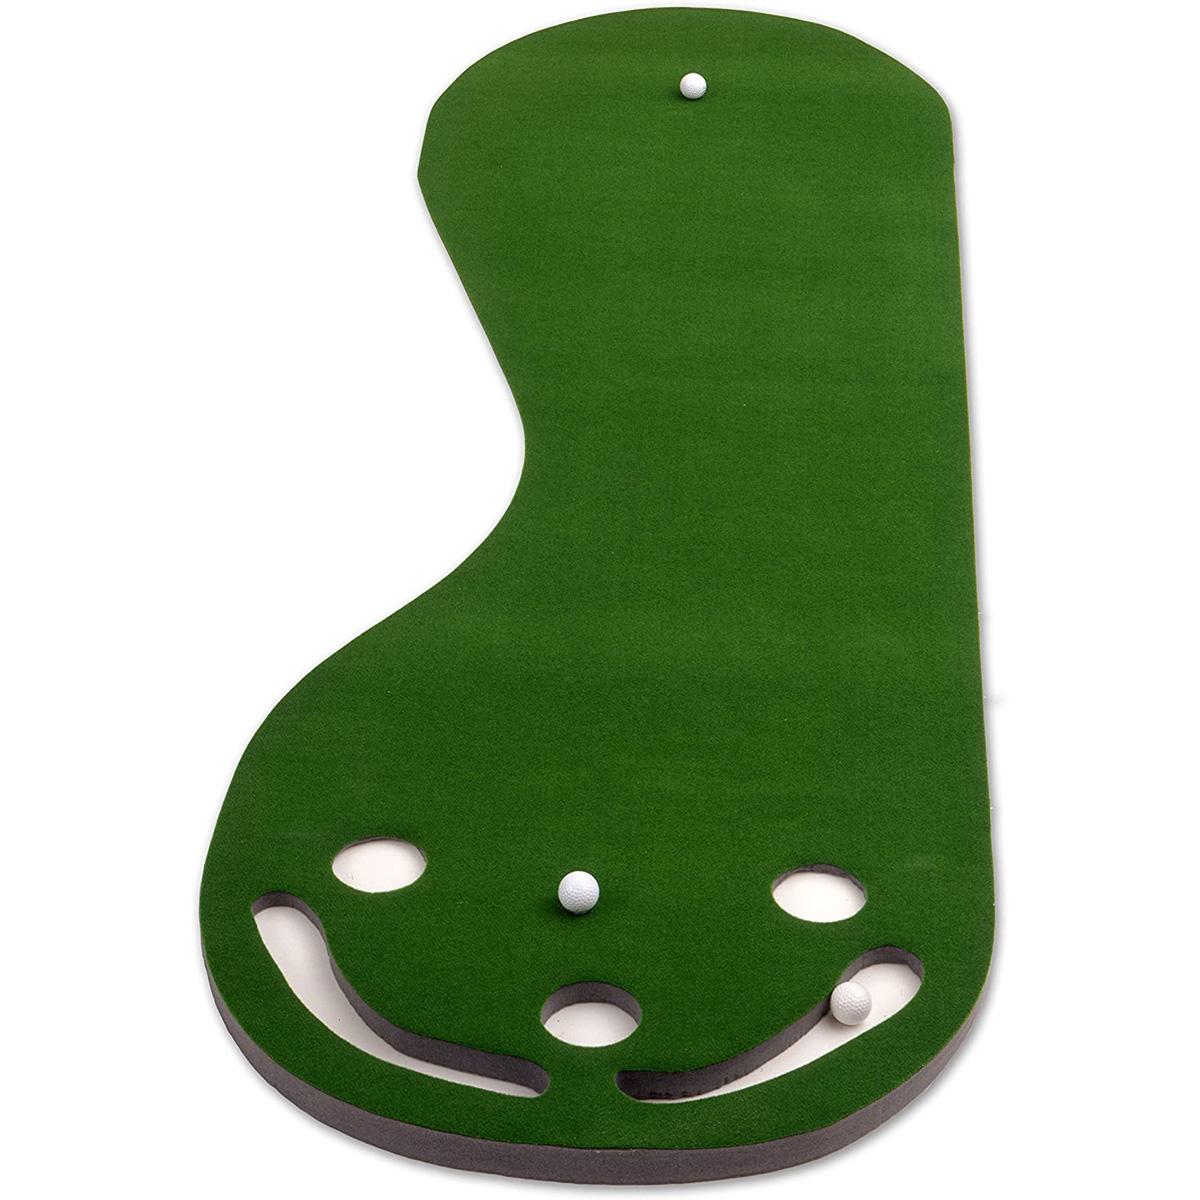 Putt-A-Bout Grassroots Par Three Putting Green for $27.45 Shipped